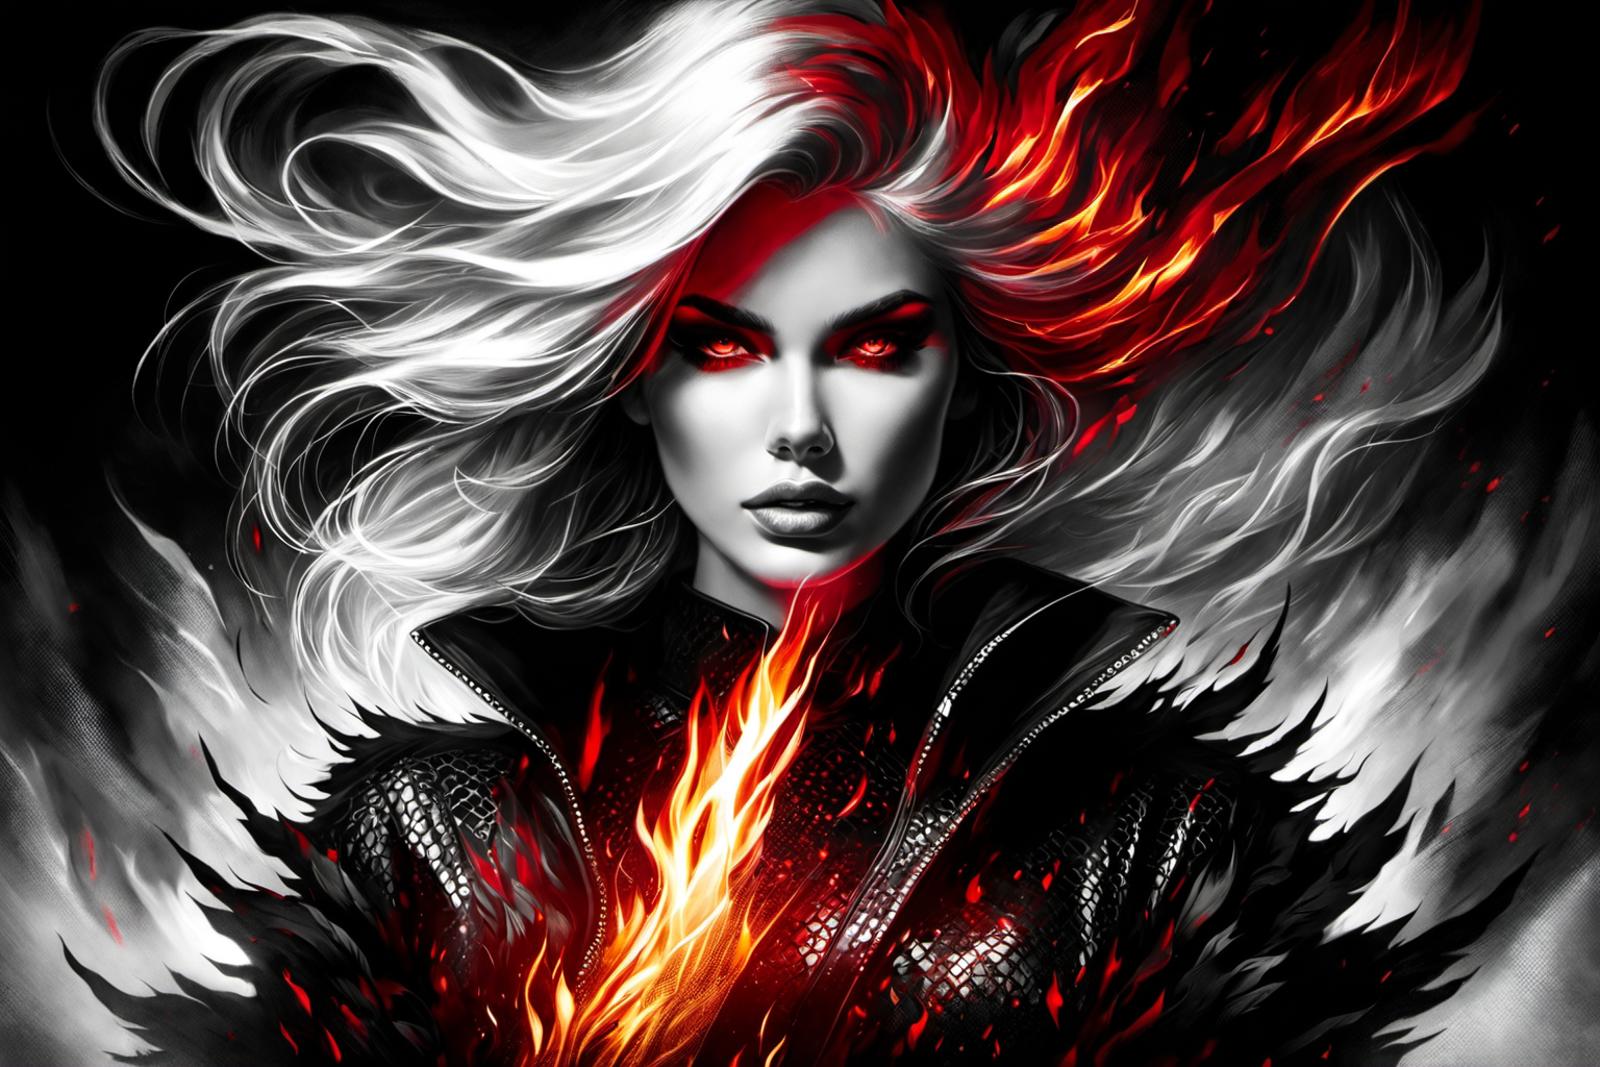 Artistic portrait of a woman with flaming hair and red eyes.